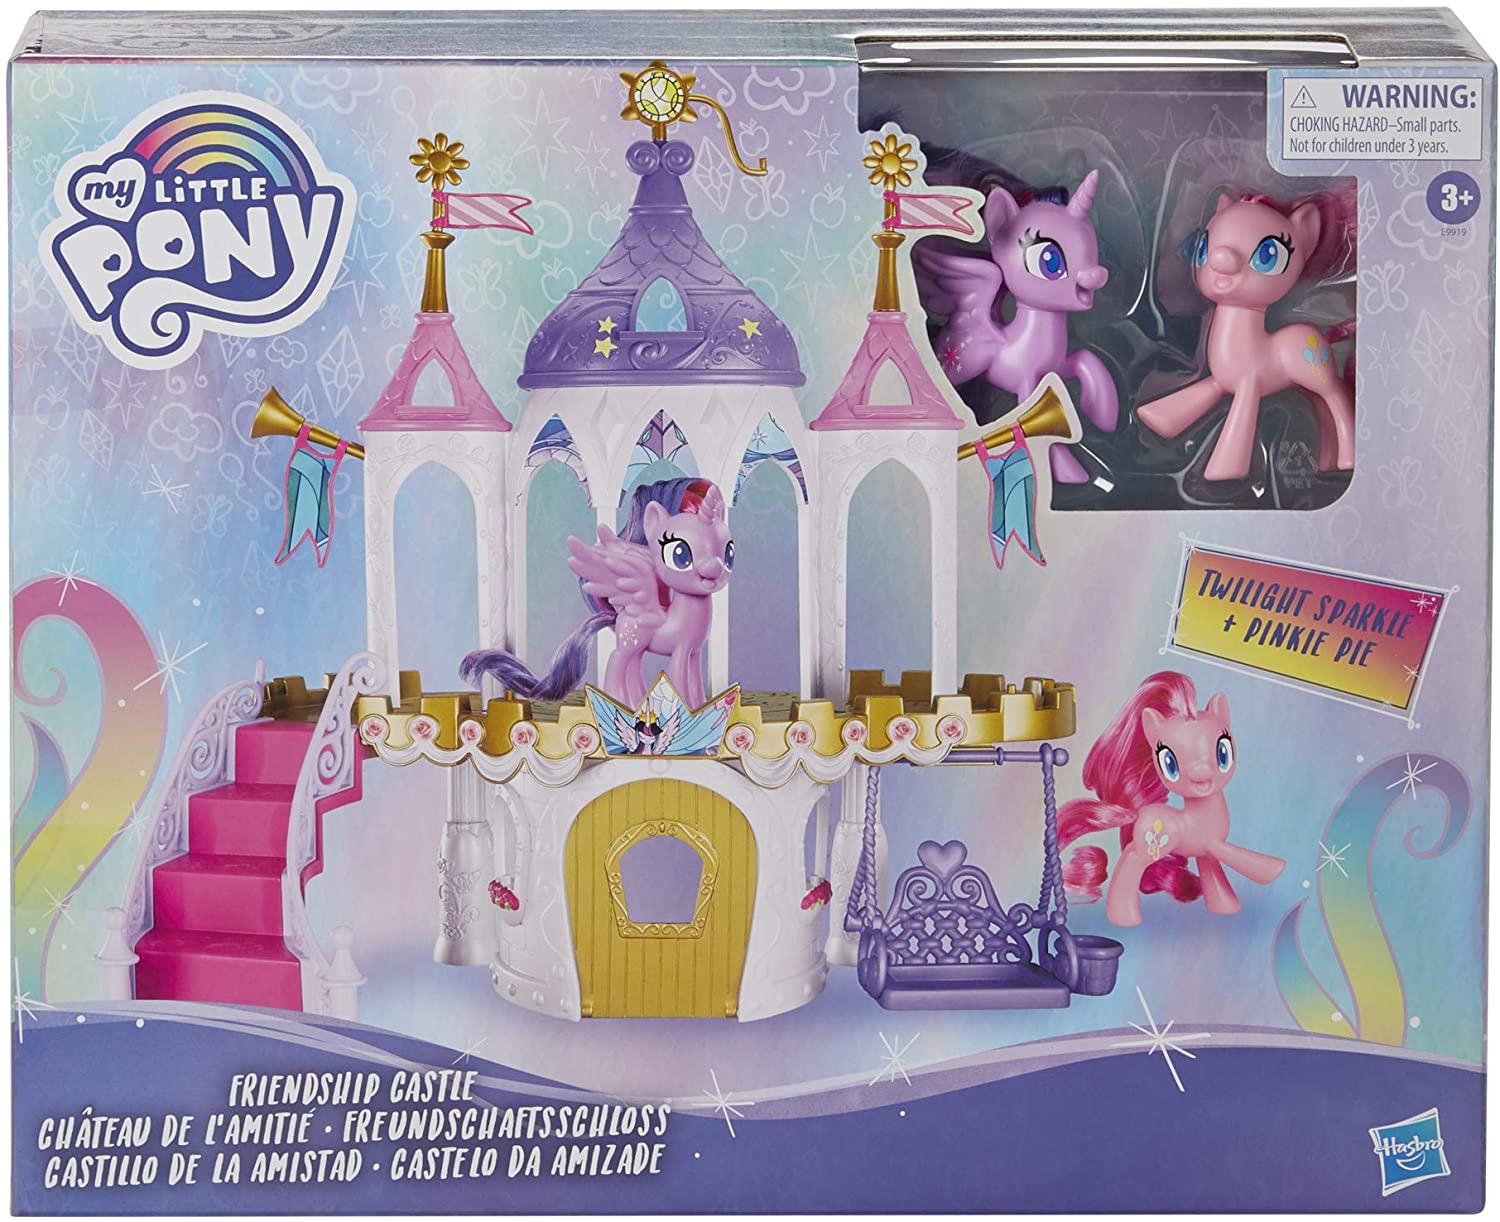 New My Little Pony Friendship Castle Play Set available now! - My